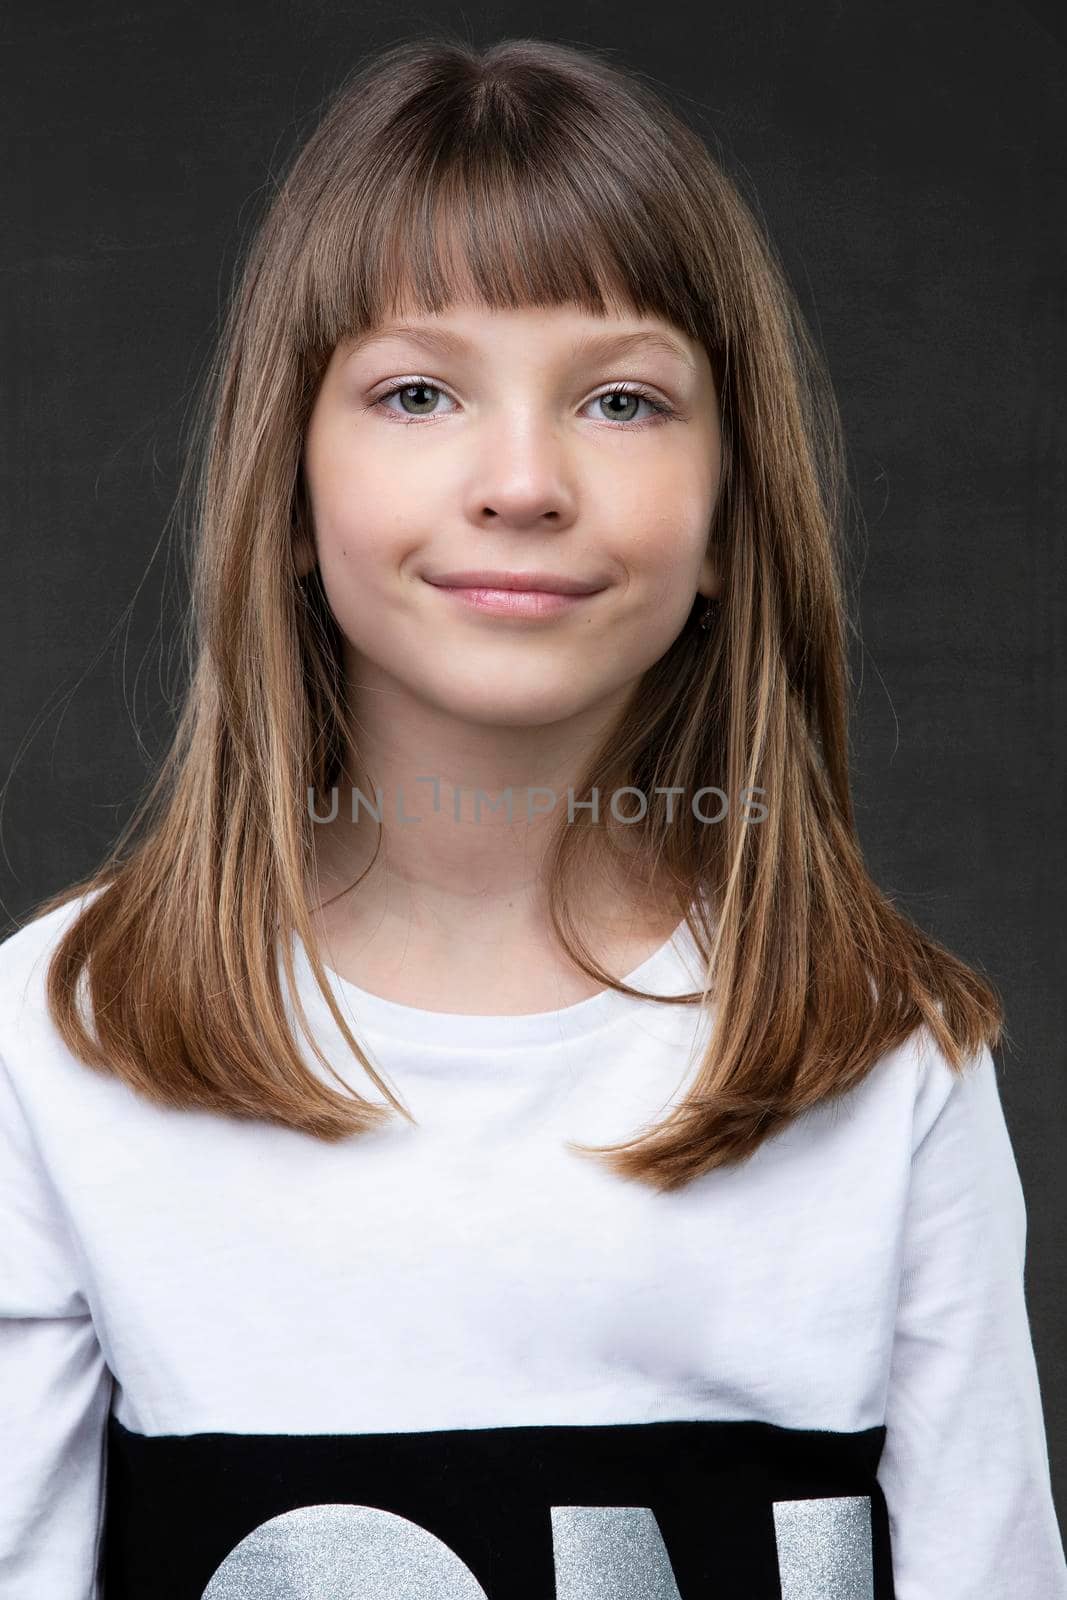 A beautiful ten year old girl is looking at the camera and smiling.